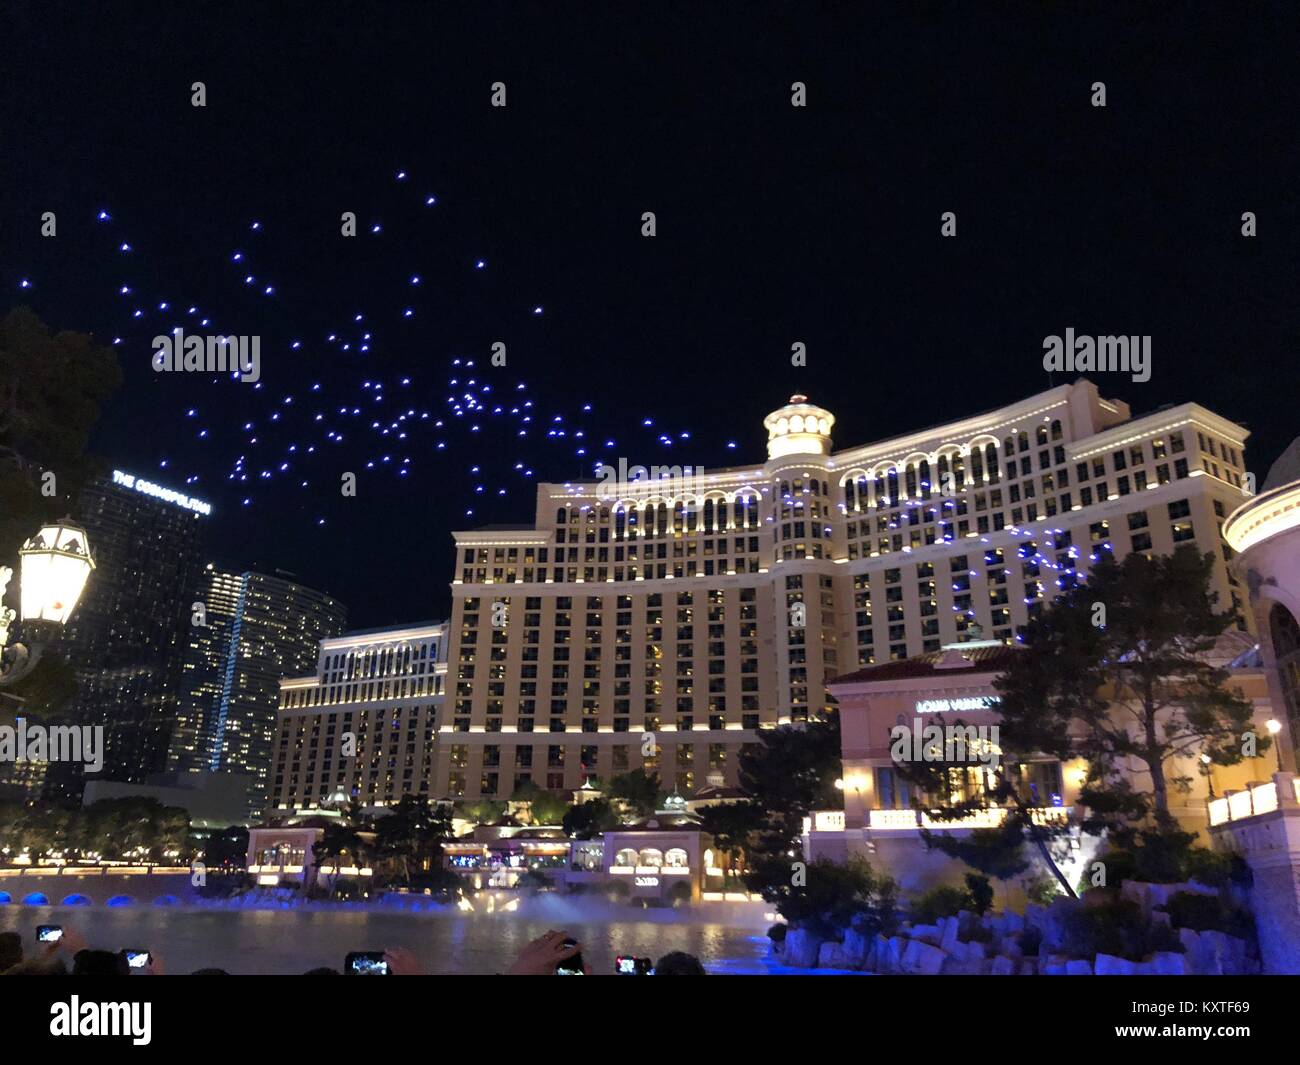 250 Intel Shooting Star mini drones taking part in a light show over the  Bellagio Hotel fountain in Las Vegas, during CES Stock Photo - Alamy